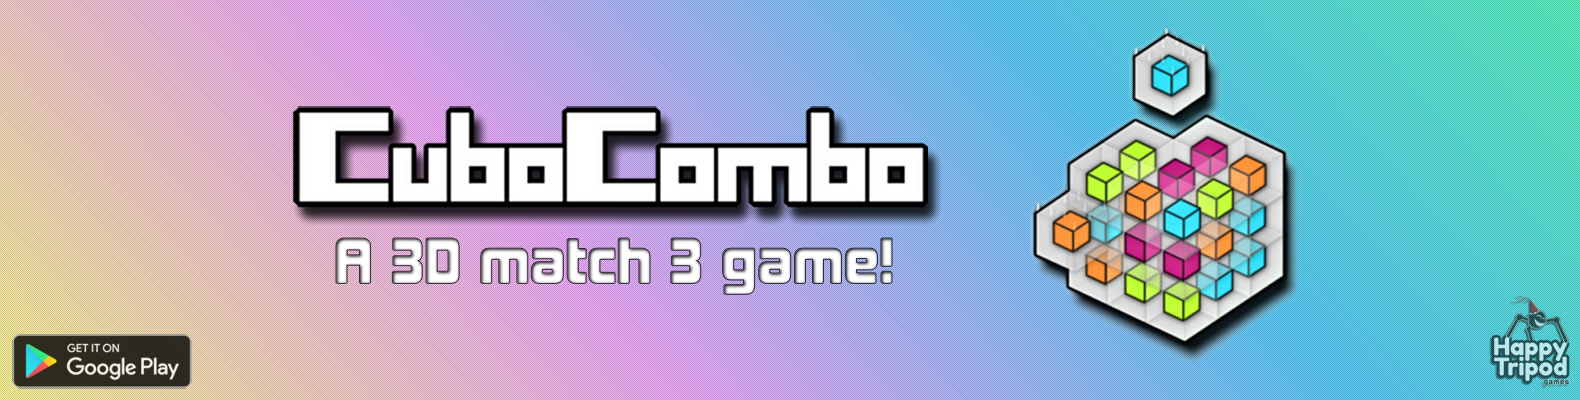 CuboCombo: A 3D match 3 game!